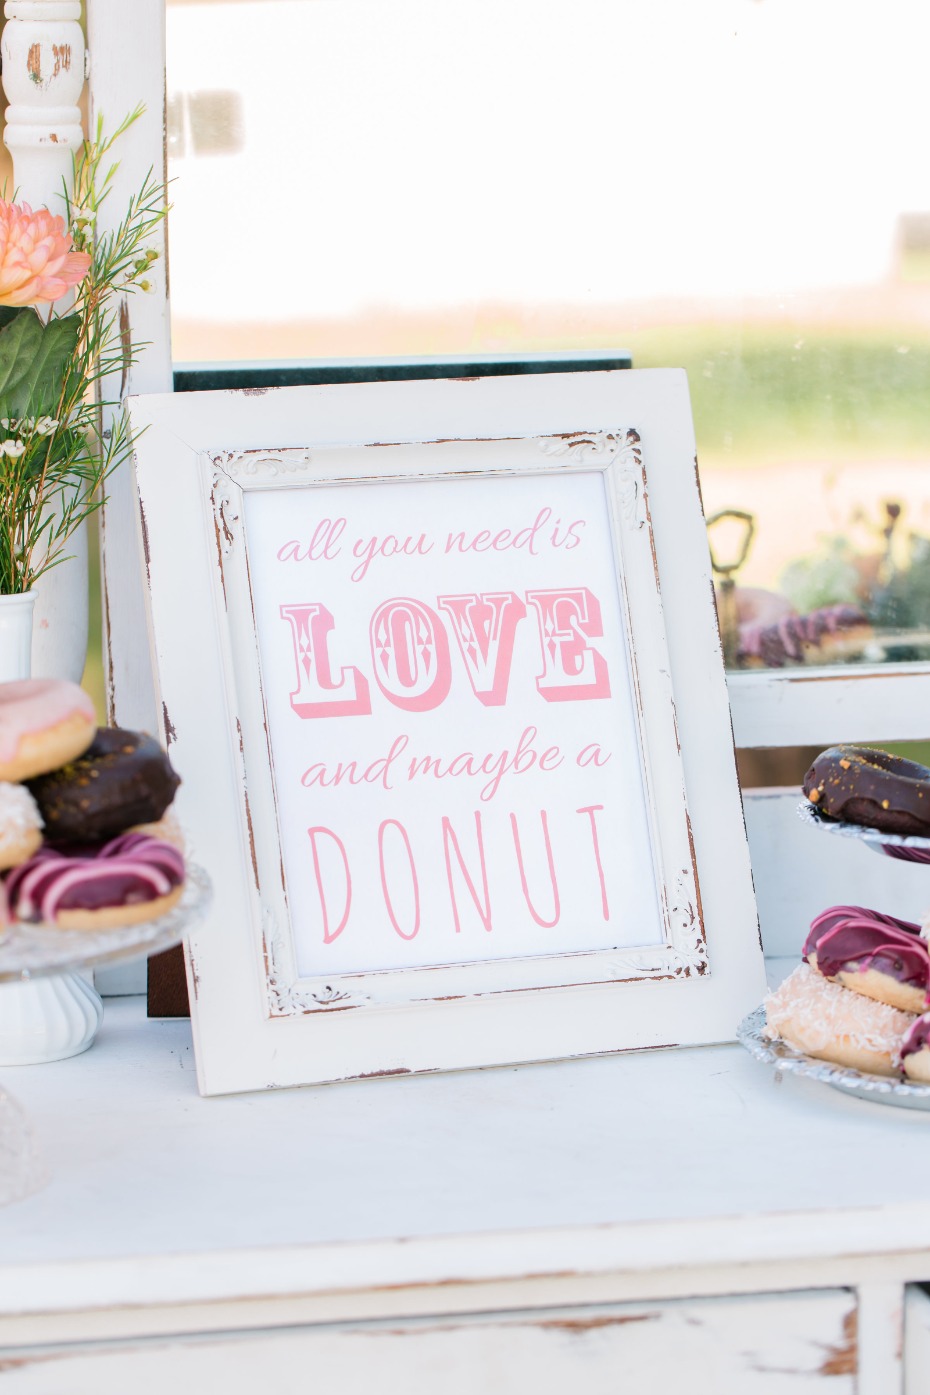 Love and donut sign 